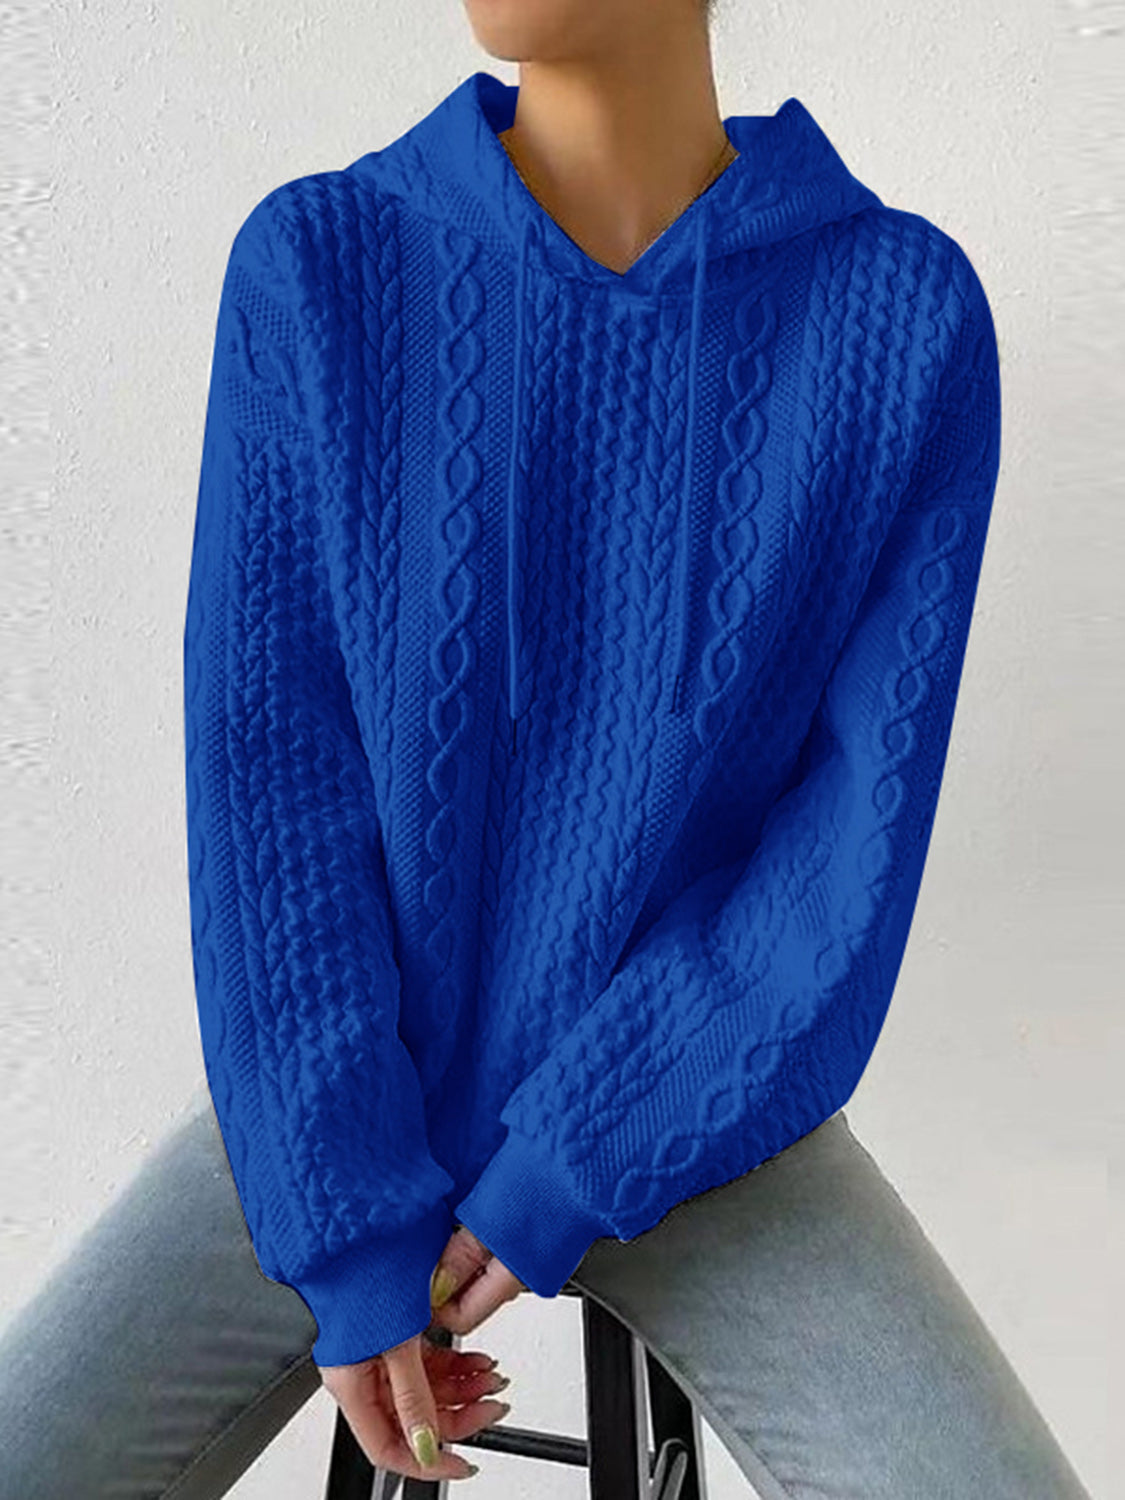 Textured Drawstring Long Sleeve Hoodie - Blue / S - Women’s Clothing & Accessories - Shirts & Tops - 13 - 2024